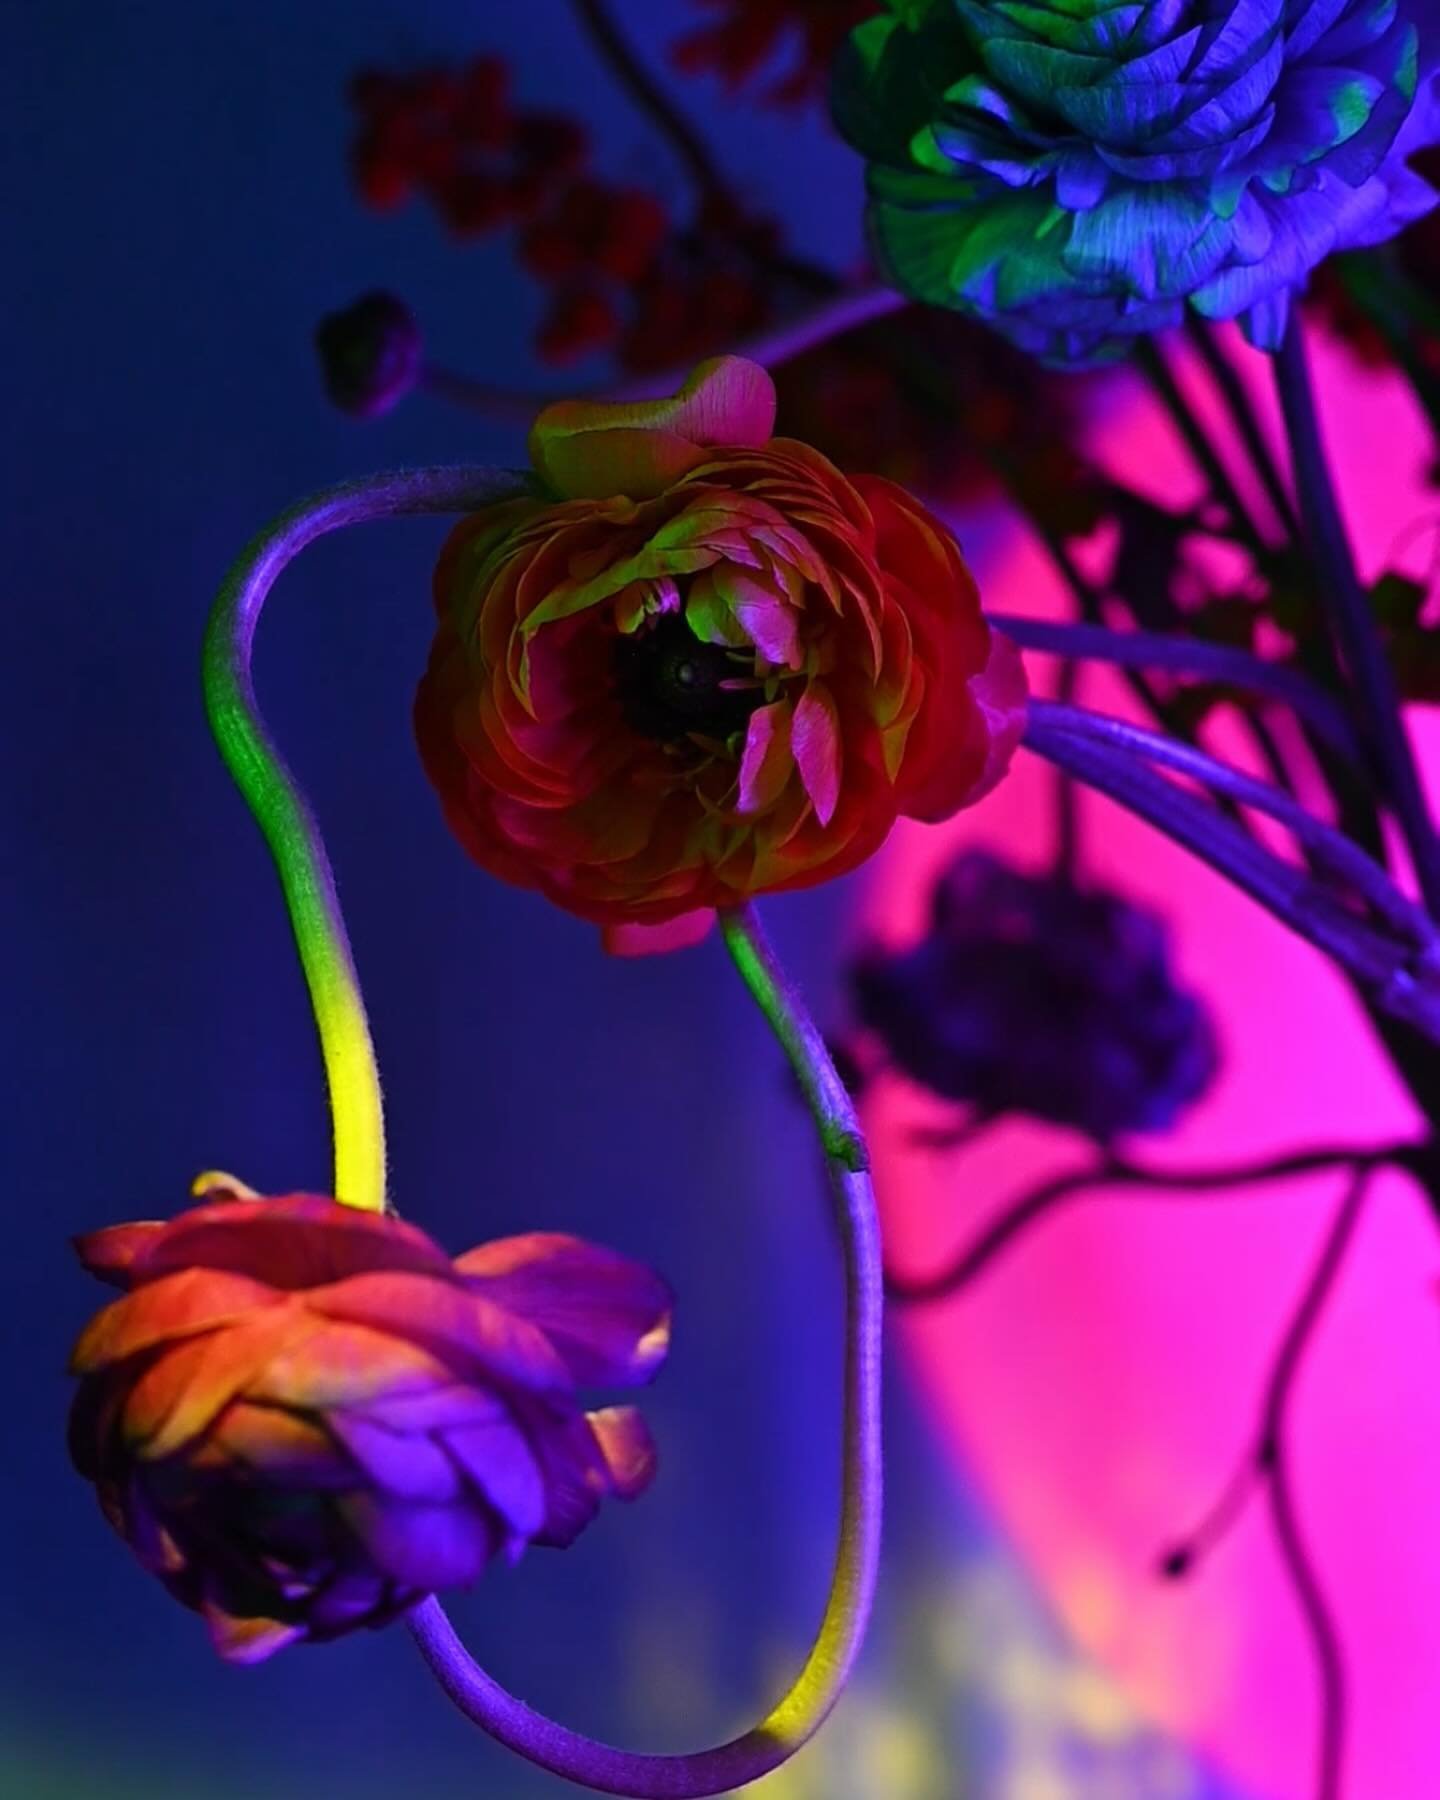 Some of my favorite stills from my experimental reel. Fun fact: No color correction was added during post. 😱 

#floralarrangement #floralart #floralphotography #flowerpower #projectorart